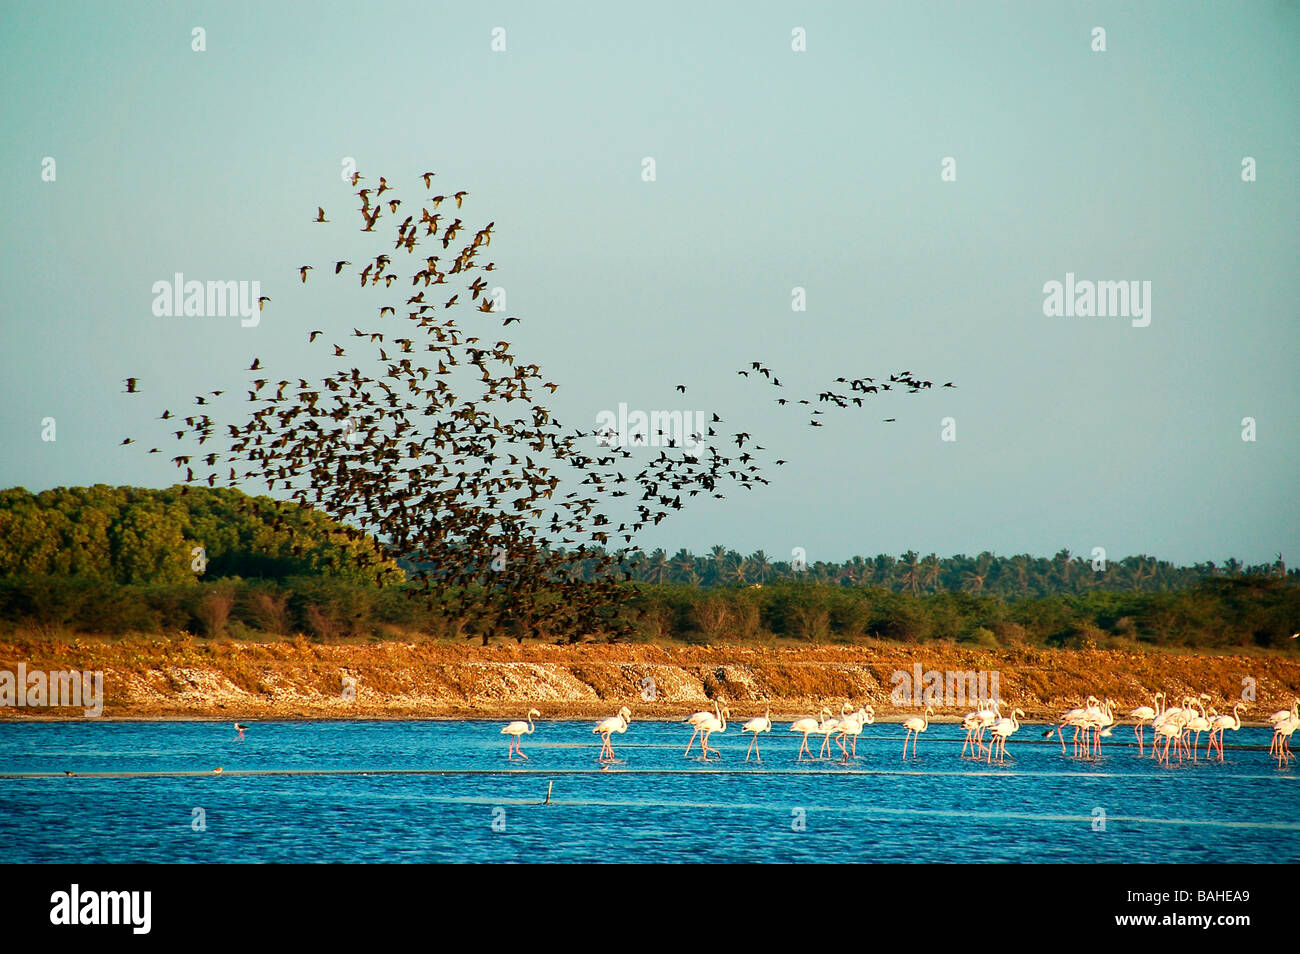 formation flying by Glossy ibis Stock Photo